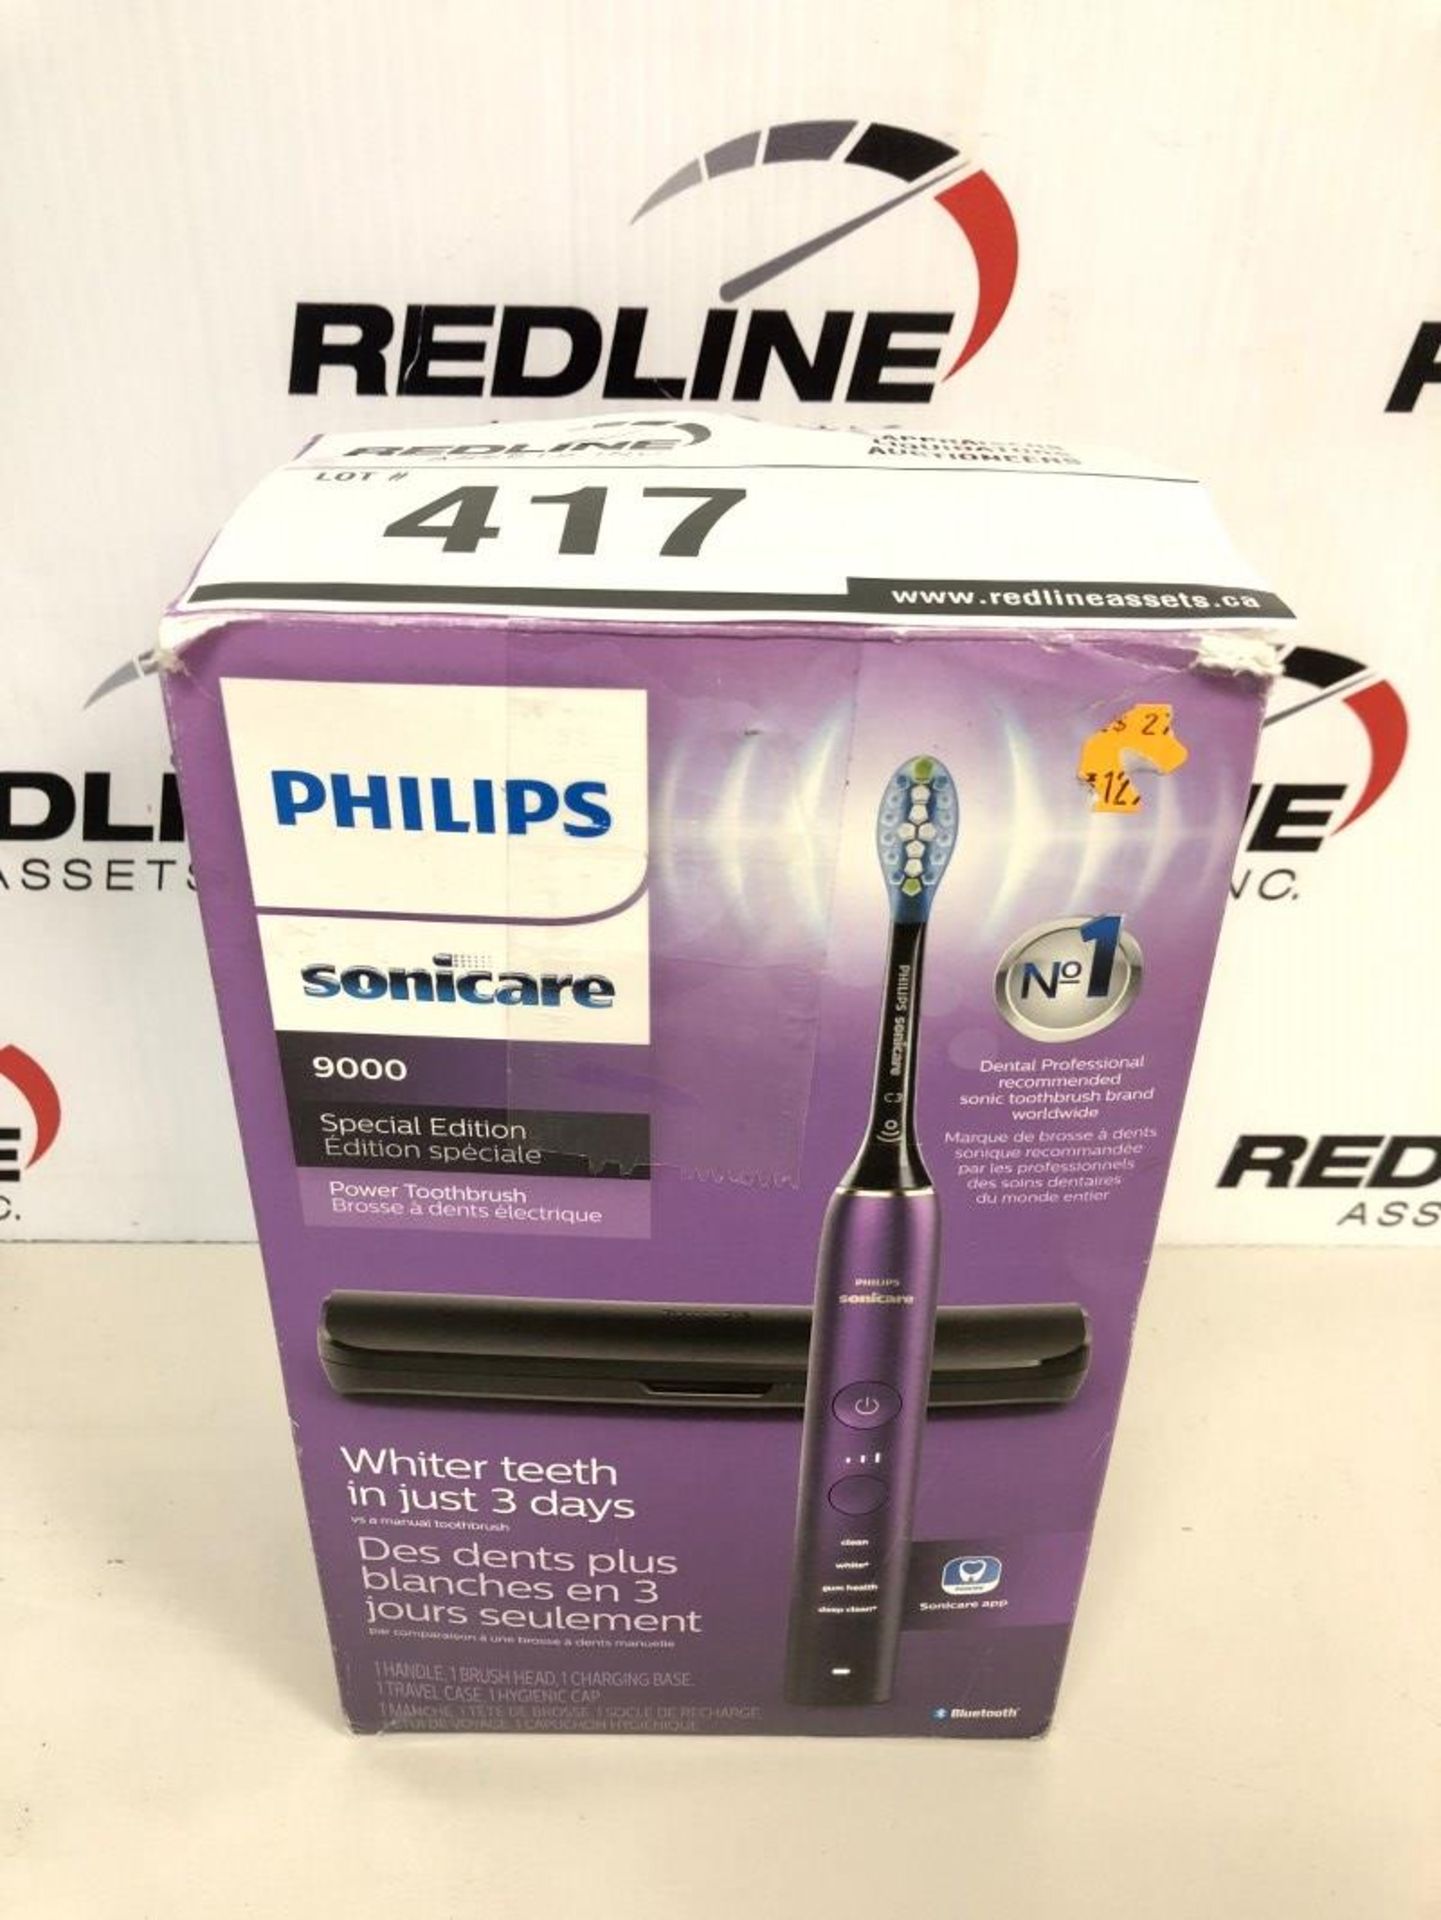 Philips - Sonicare 9000 - Power Toothbrush - Special Edition